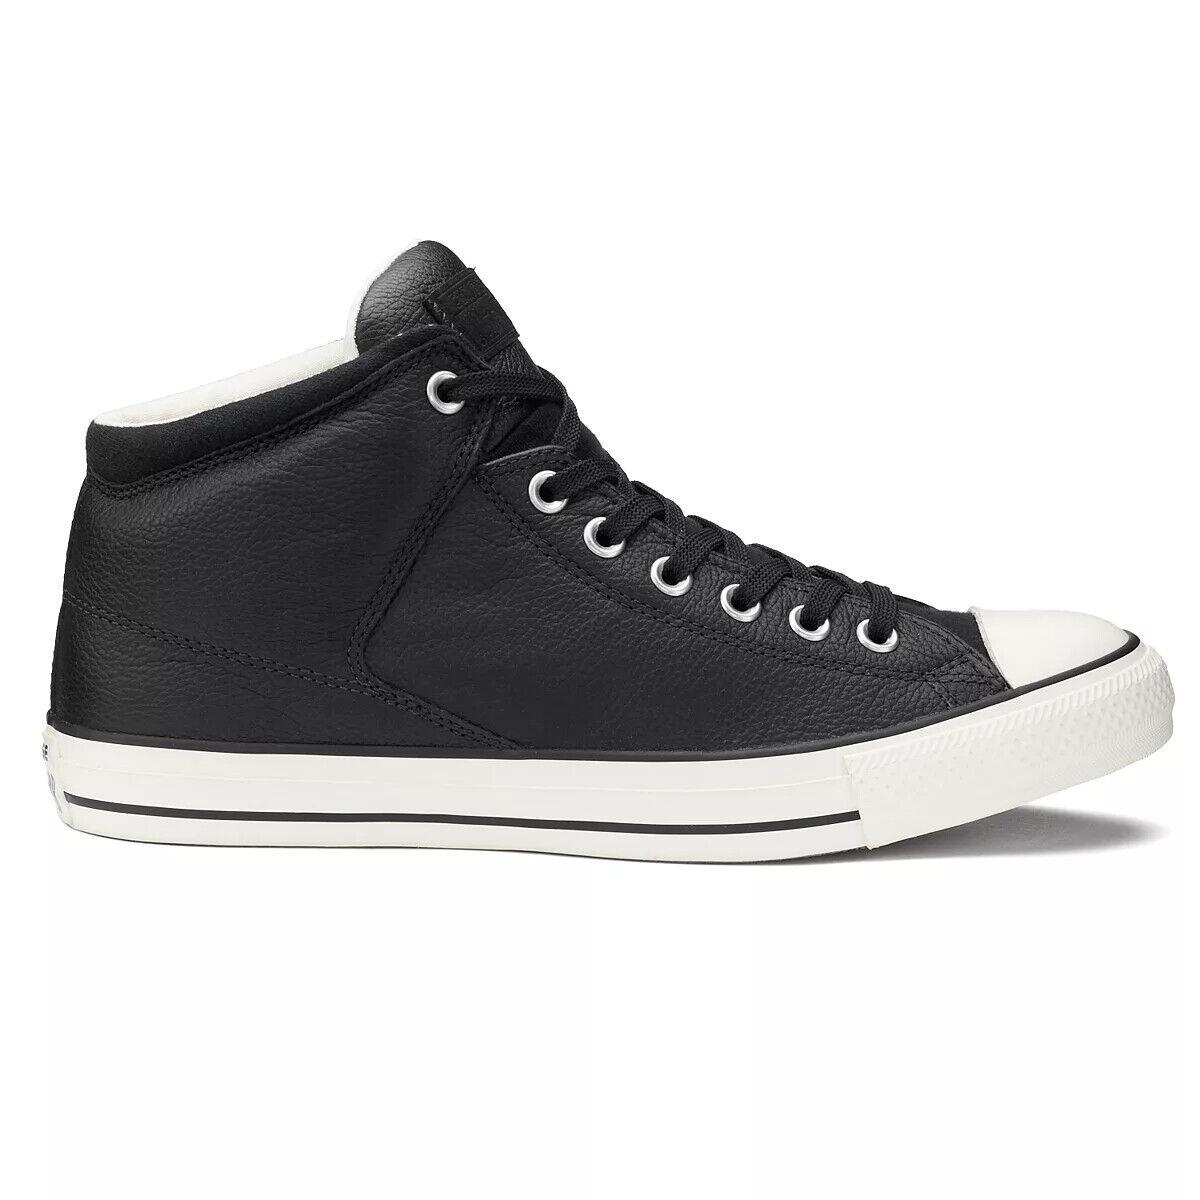 Converse Mens Chuck Taylor All Star High Street Mid Sneaker Leather Black